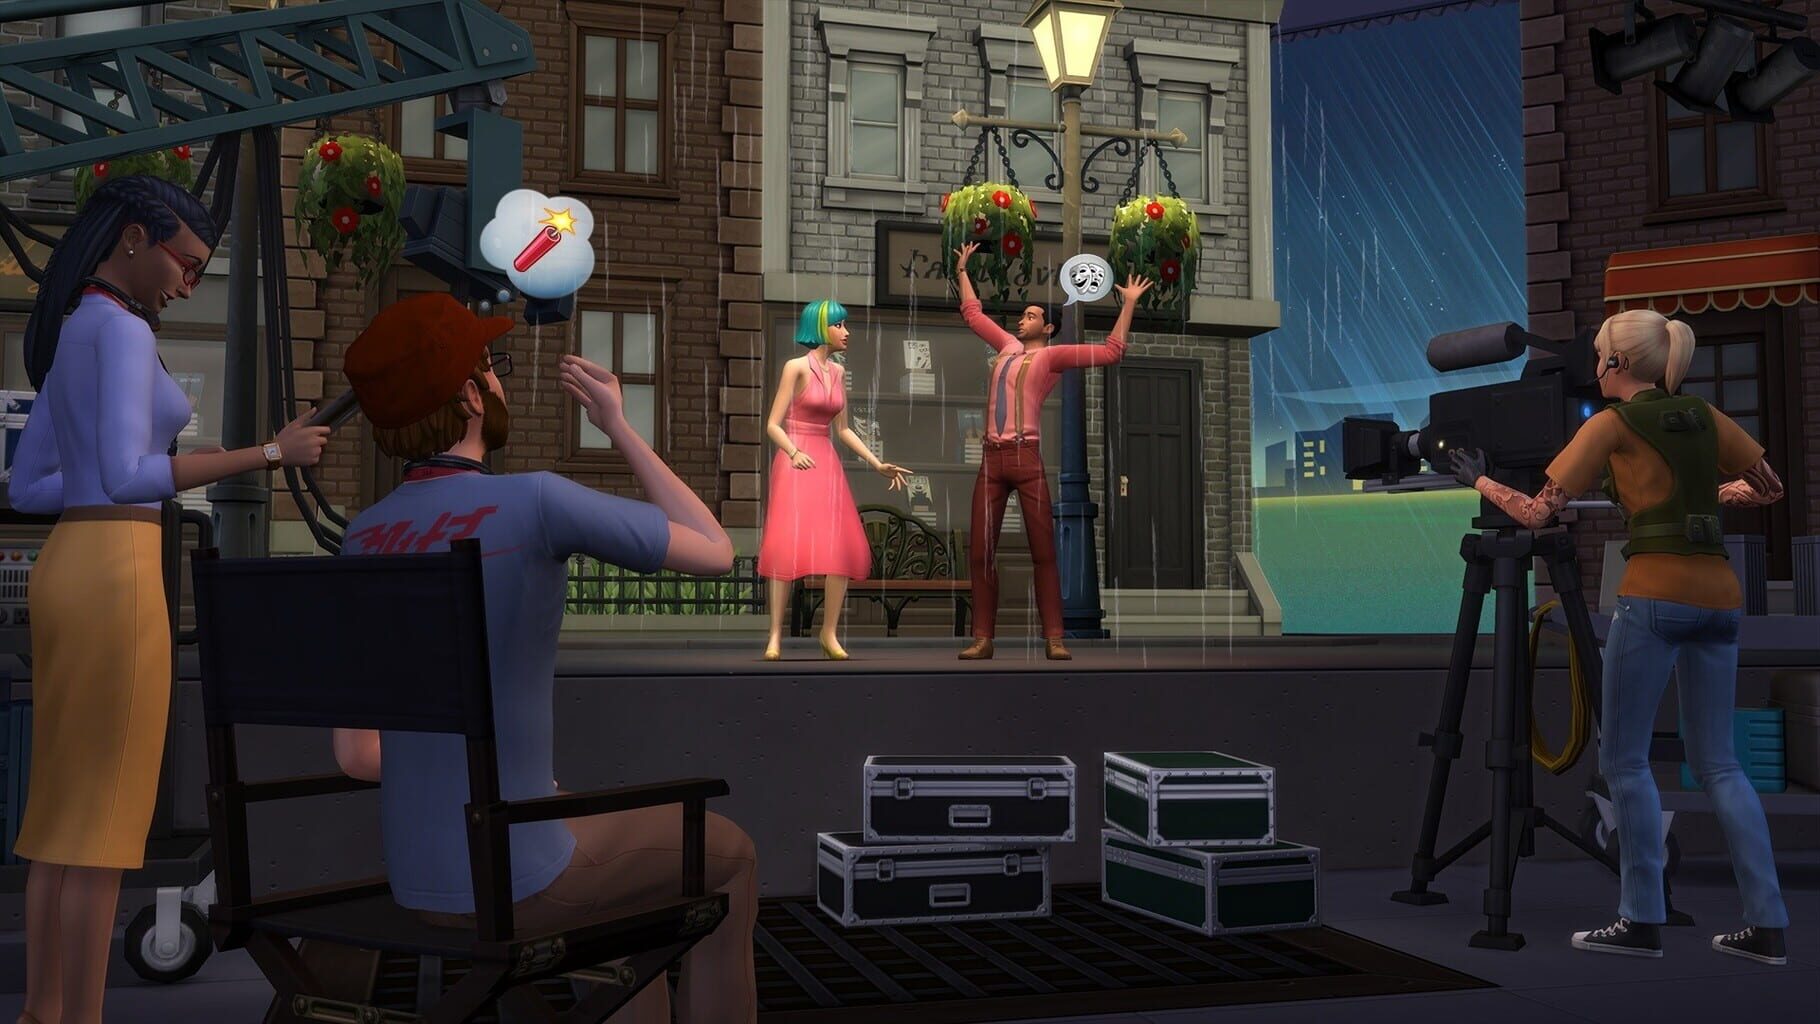 The Sims 4: Get Famous Image